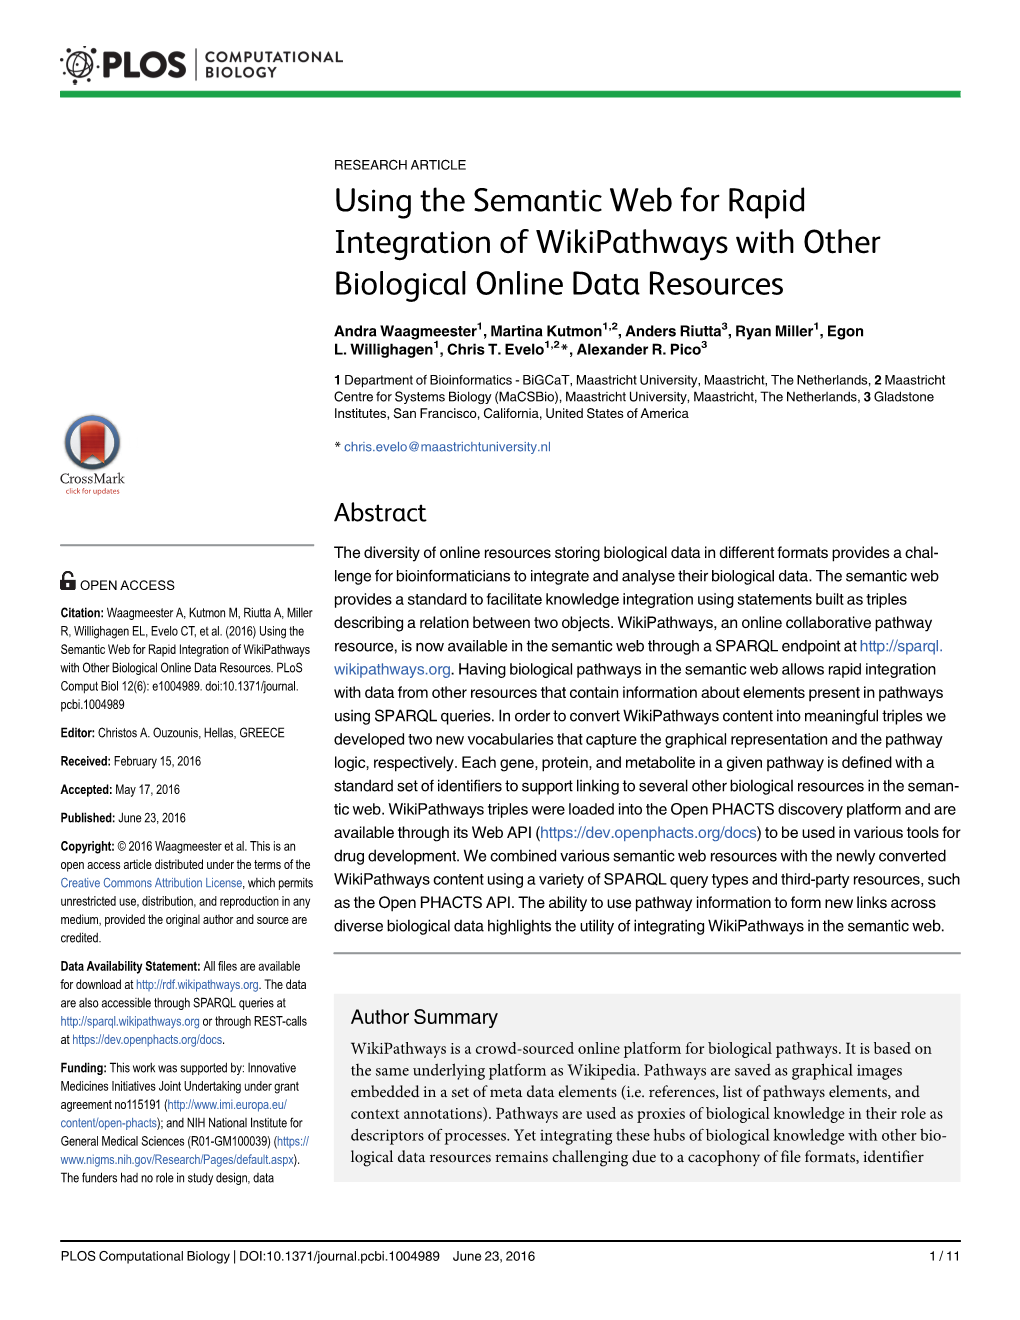 Using the Semantic Web for Rapid Integration of Wikipathways with Other Biological Online Data Resources